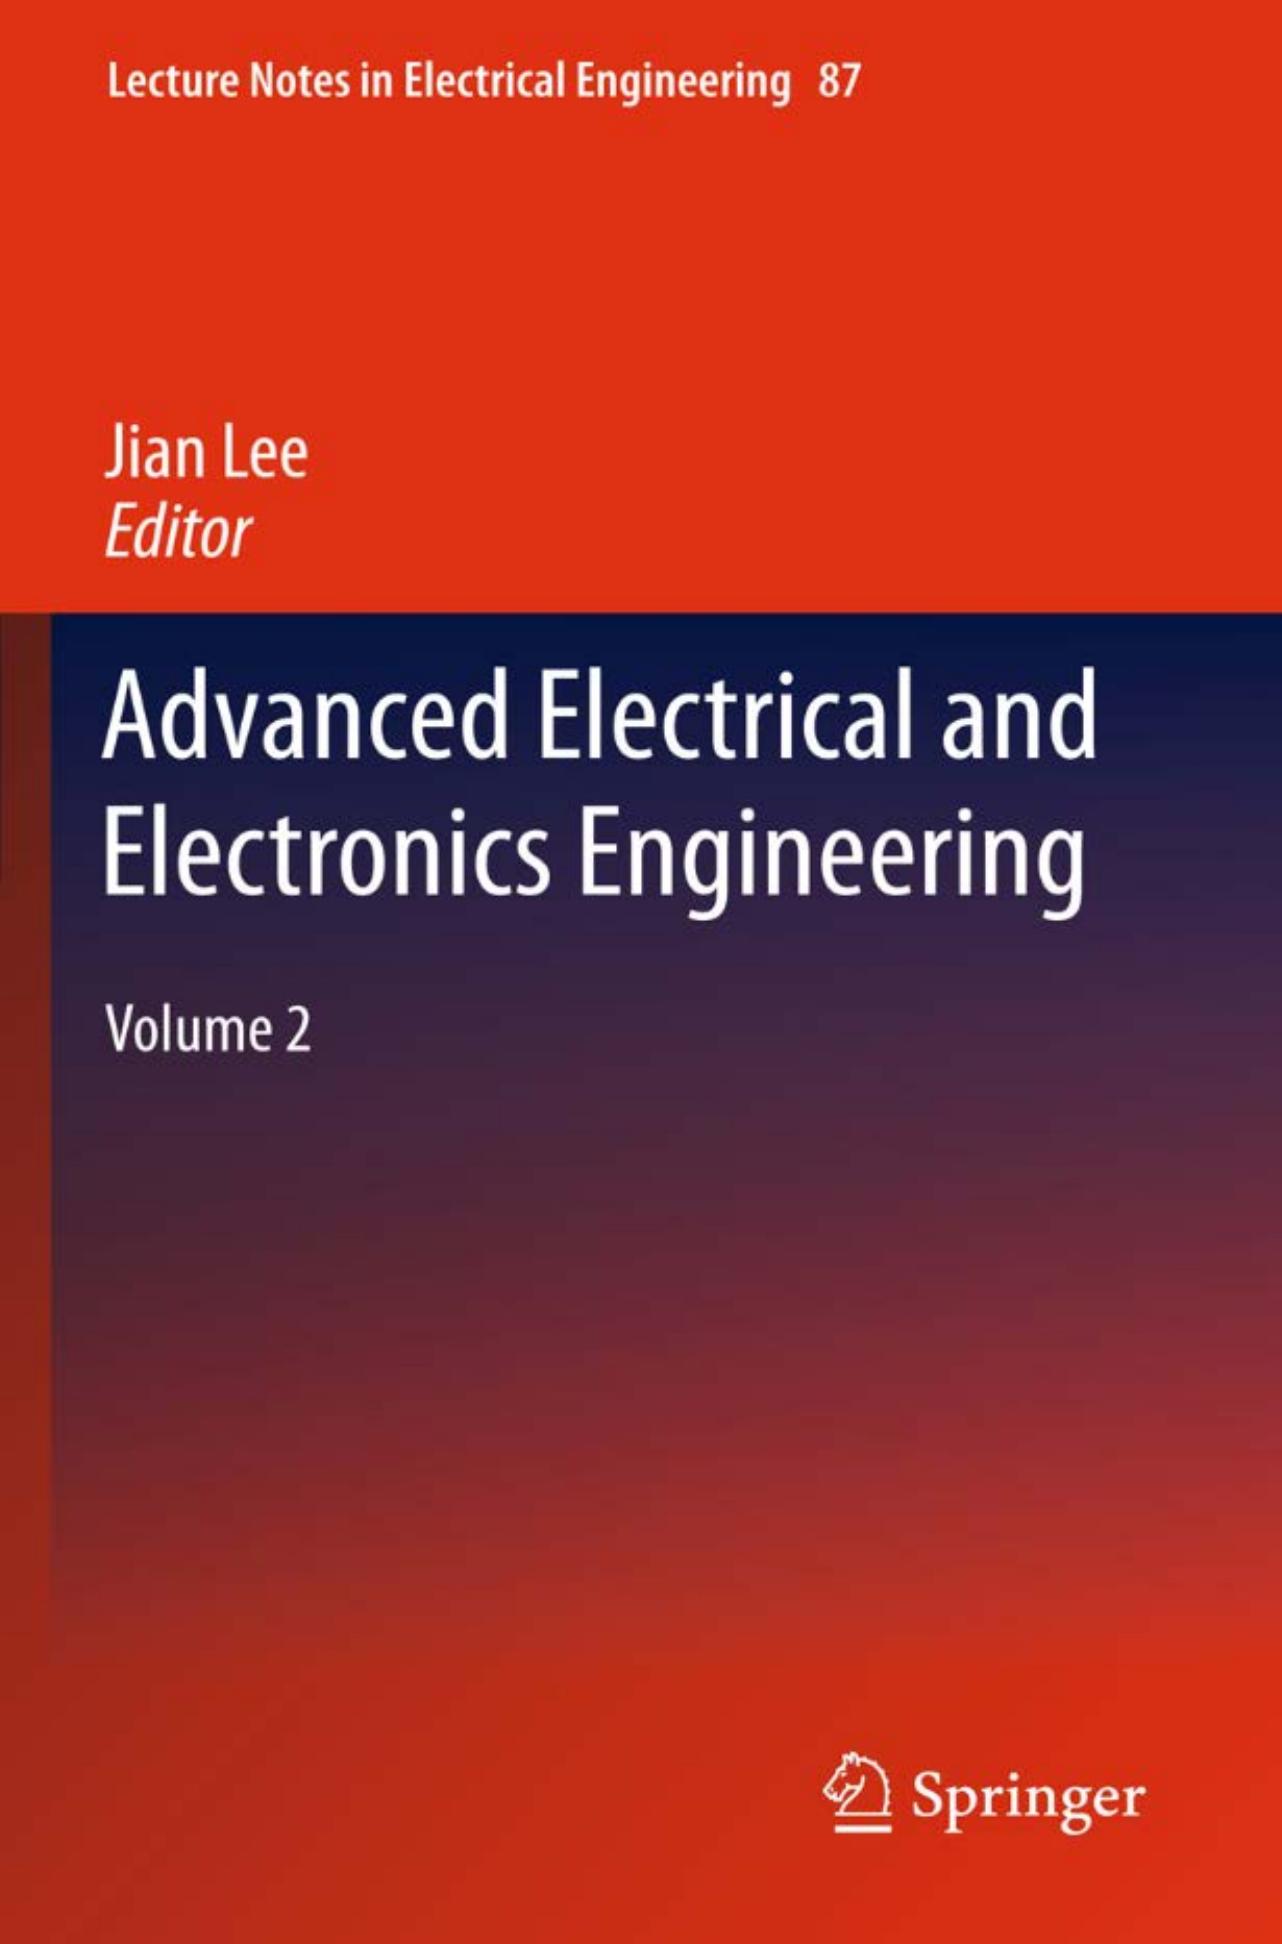 Advanced Electrical and Electronics Engineering: Volume 2 (Lecture Notes in Electrical Engineering 87)